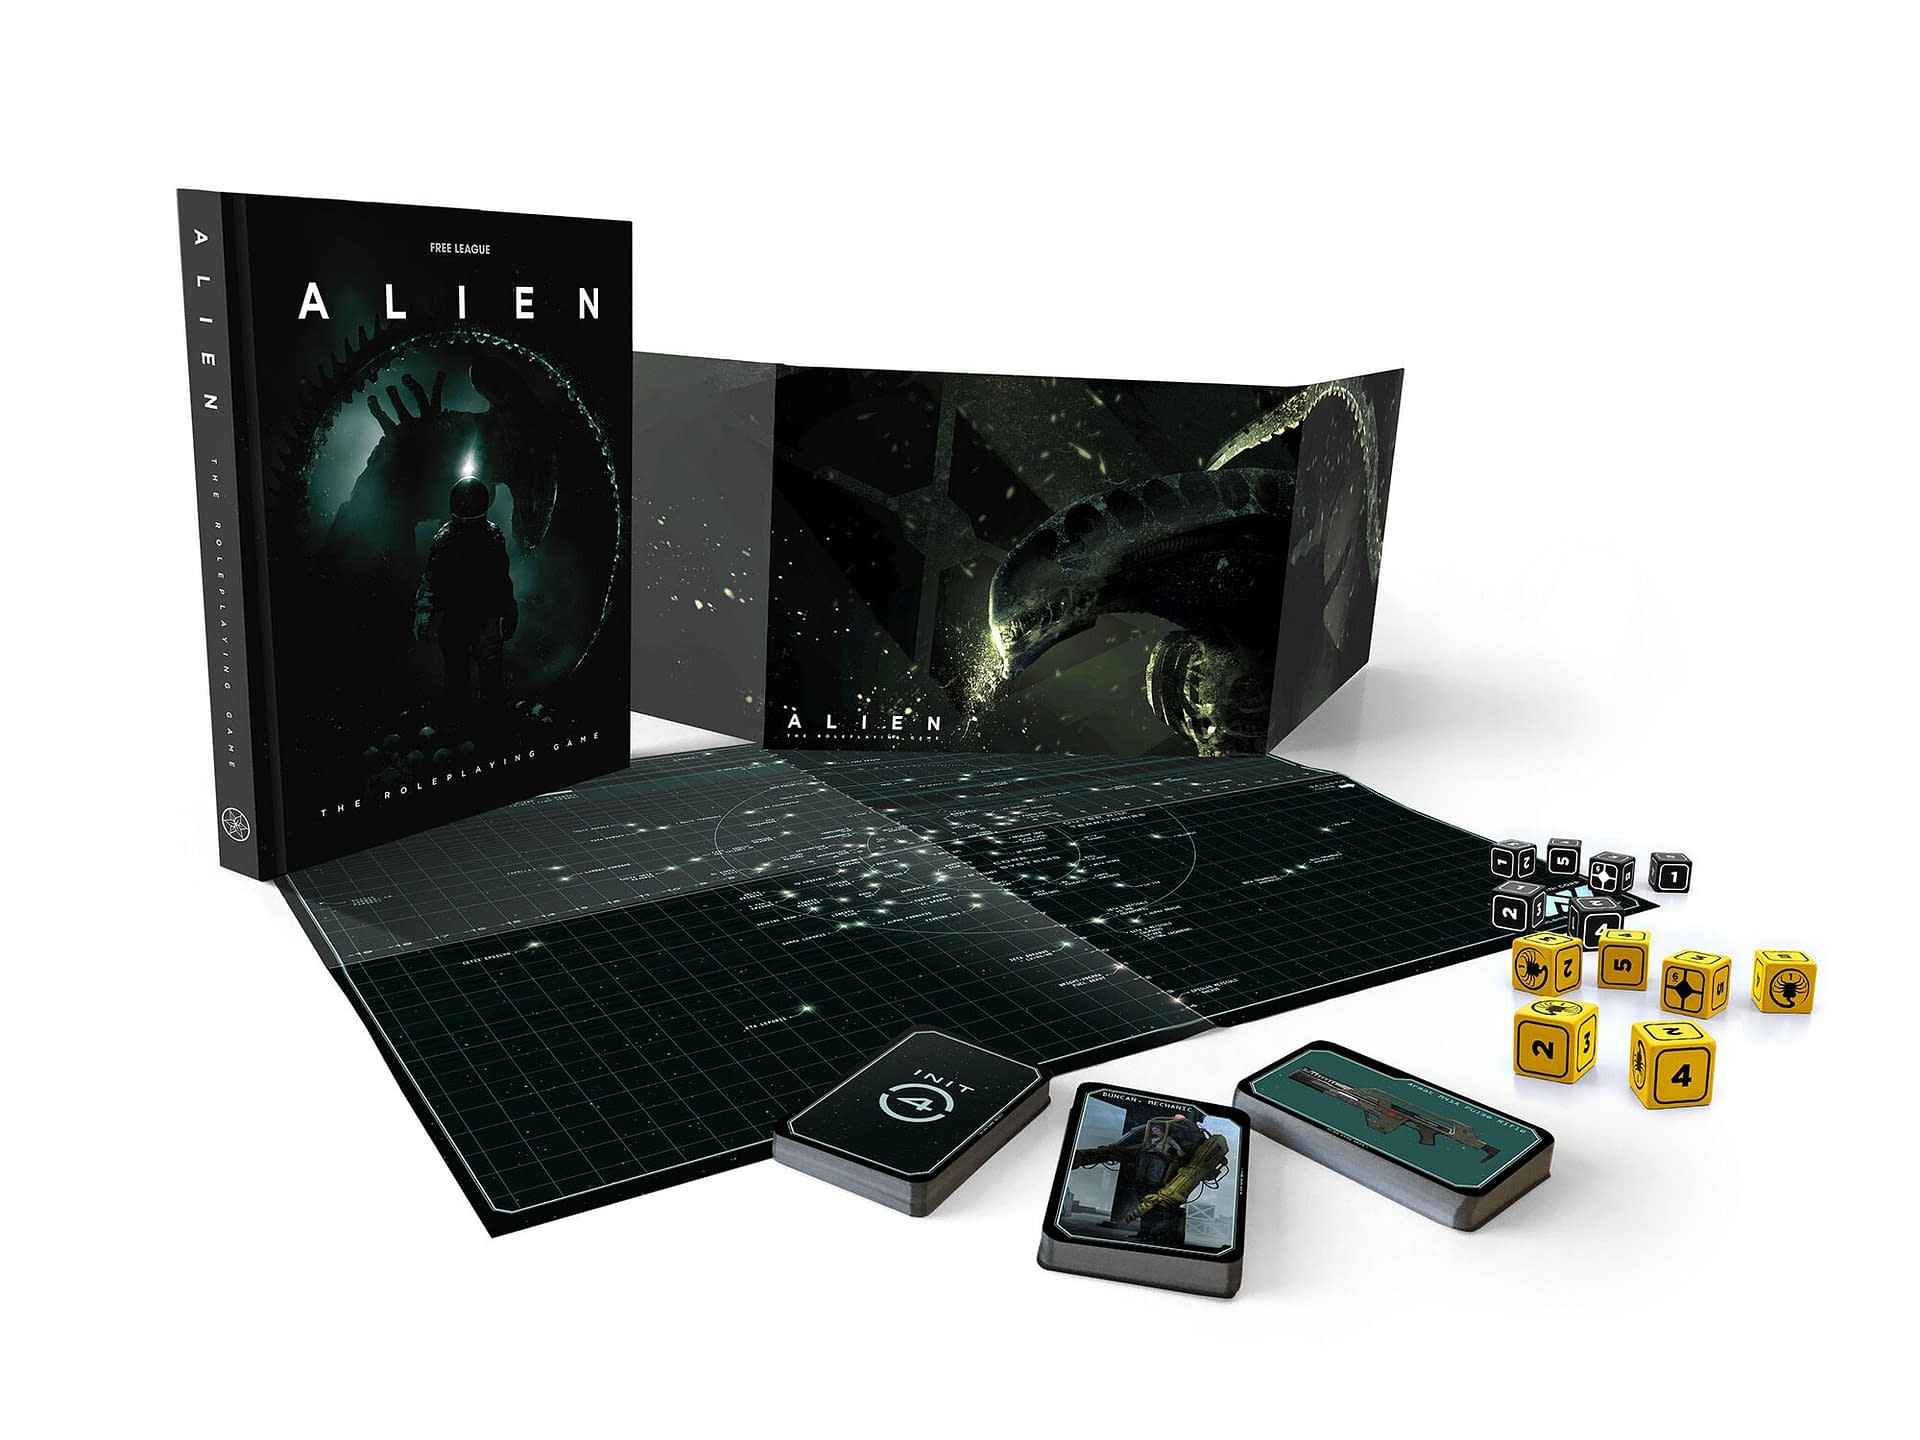 Free League Gearing up for 'Alien' RPG Pre-Orders with Free "Cinematic Starter"